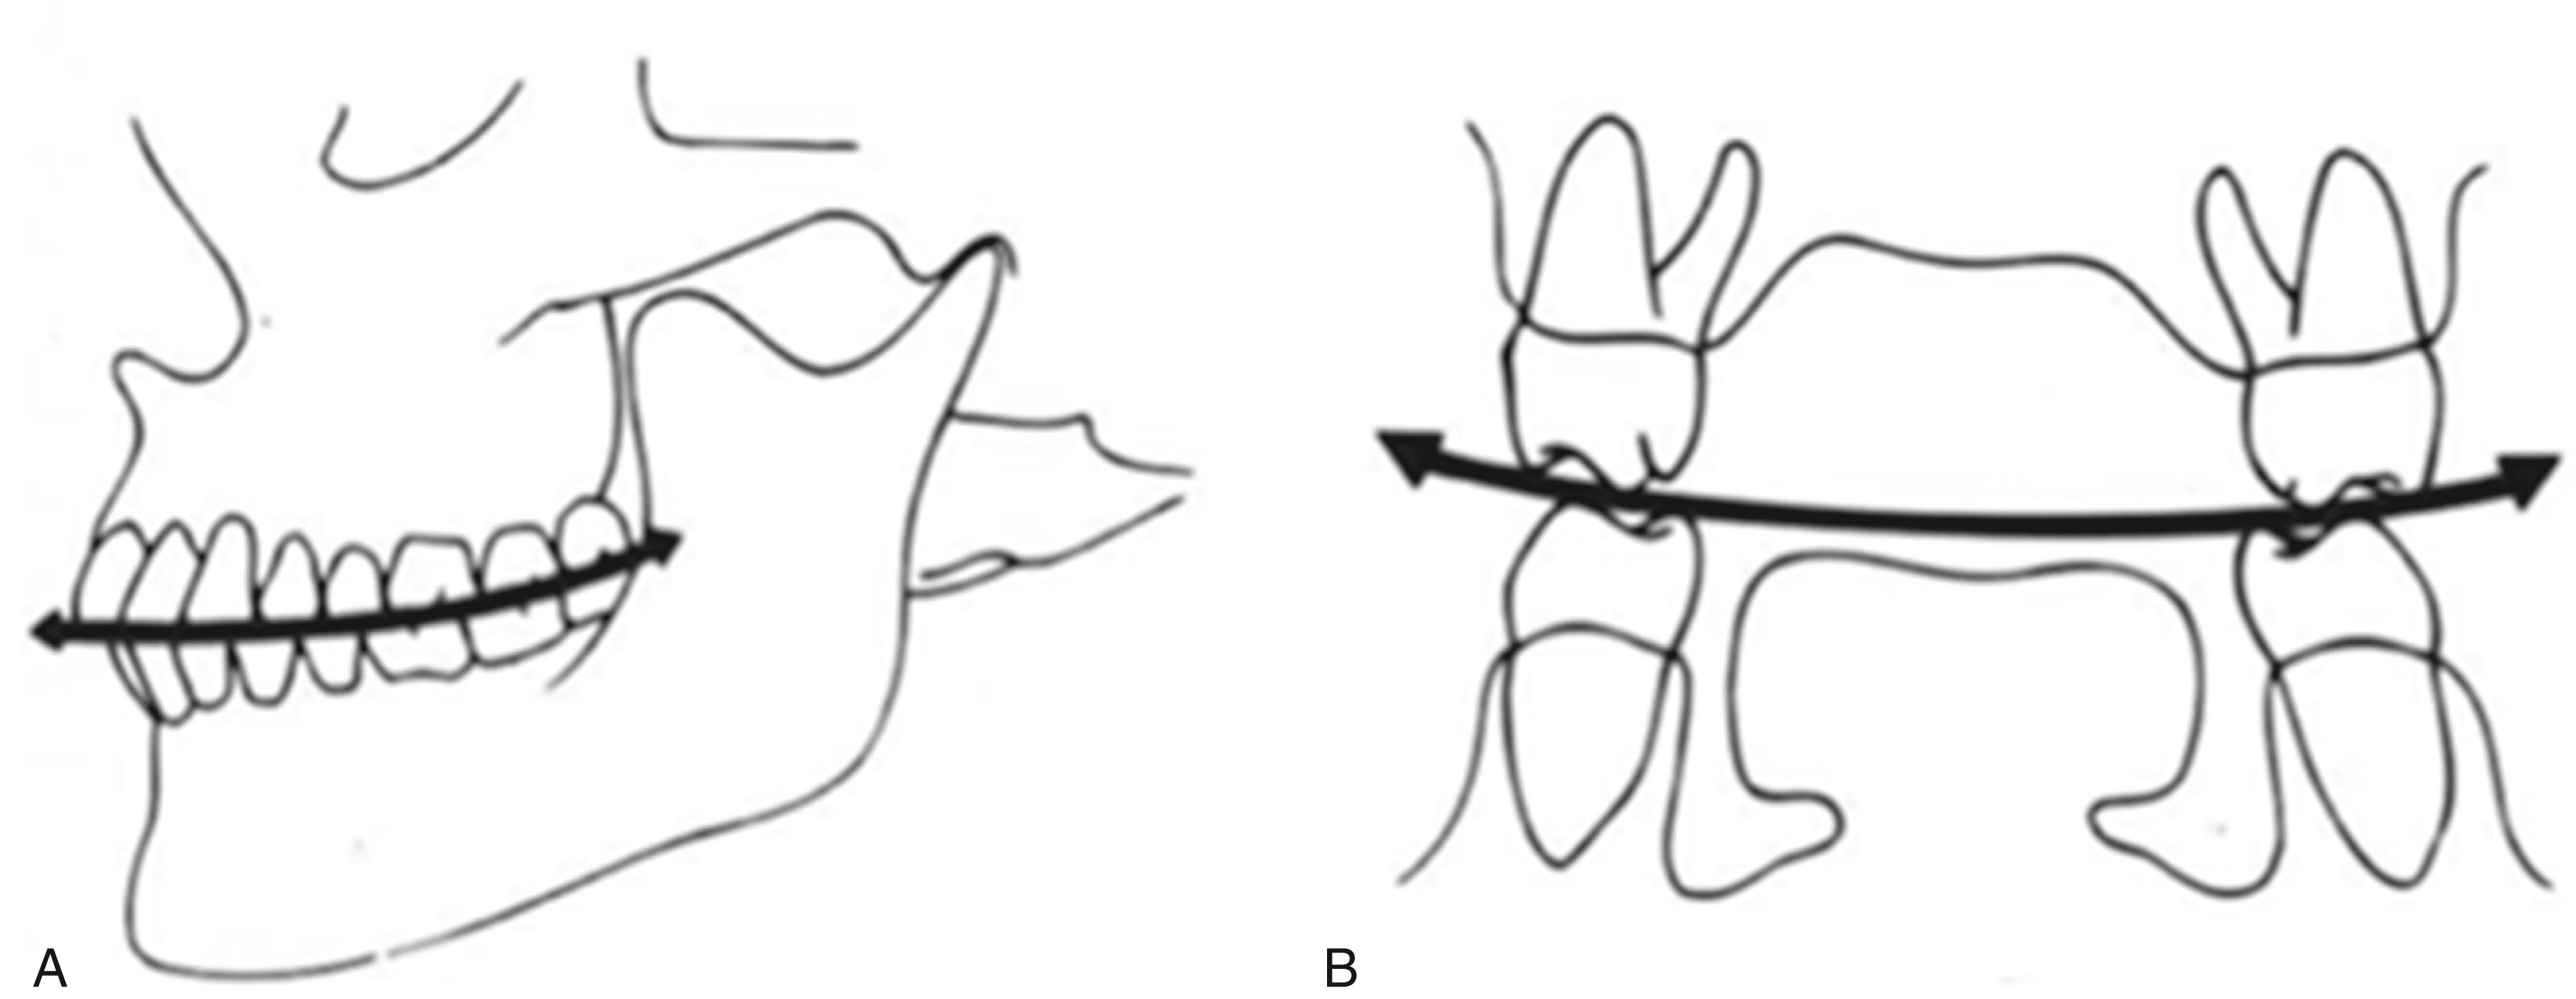 Fig. 21.4, Maxillomandibular relationships. (A) The curve of Spee, measured along the occlusal plane in the anteroposterior dimension. The curve of Wilson is shown in (B), which is a line drawn between the dentition in the frontal plane.